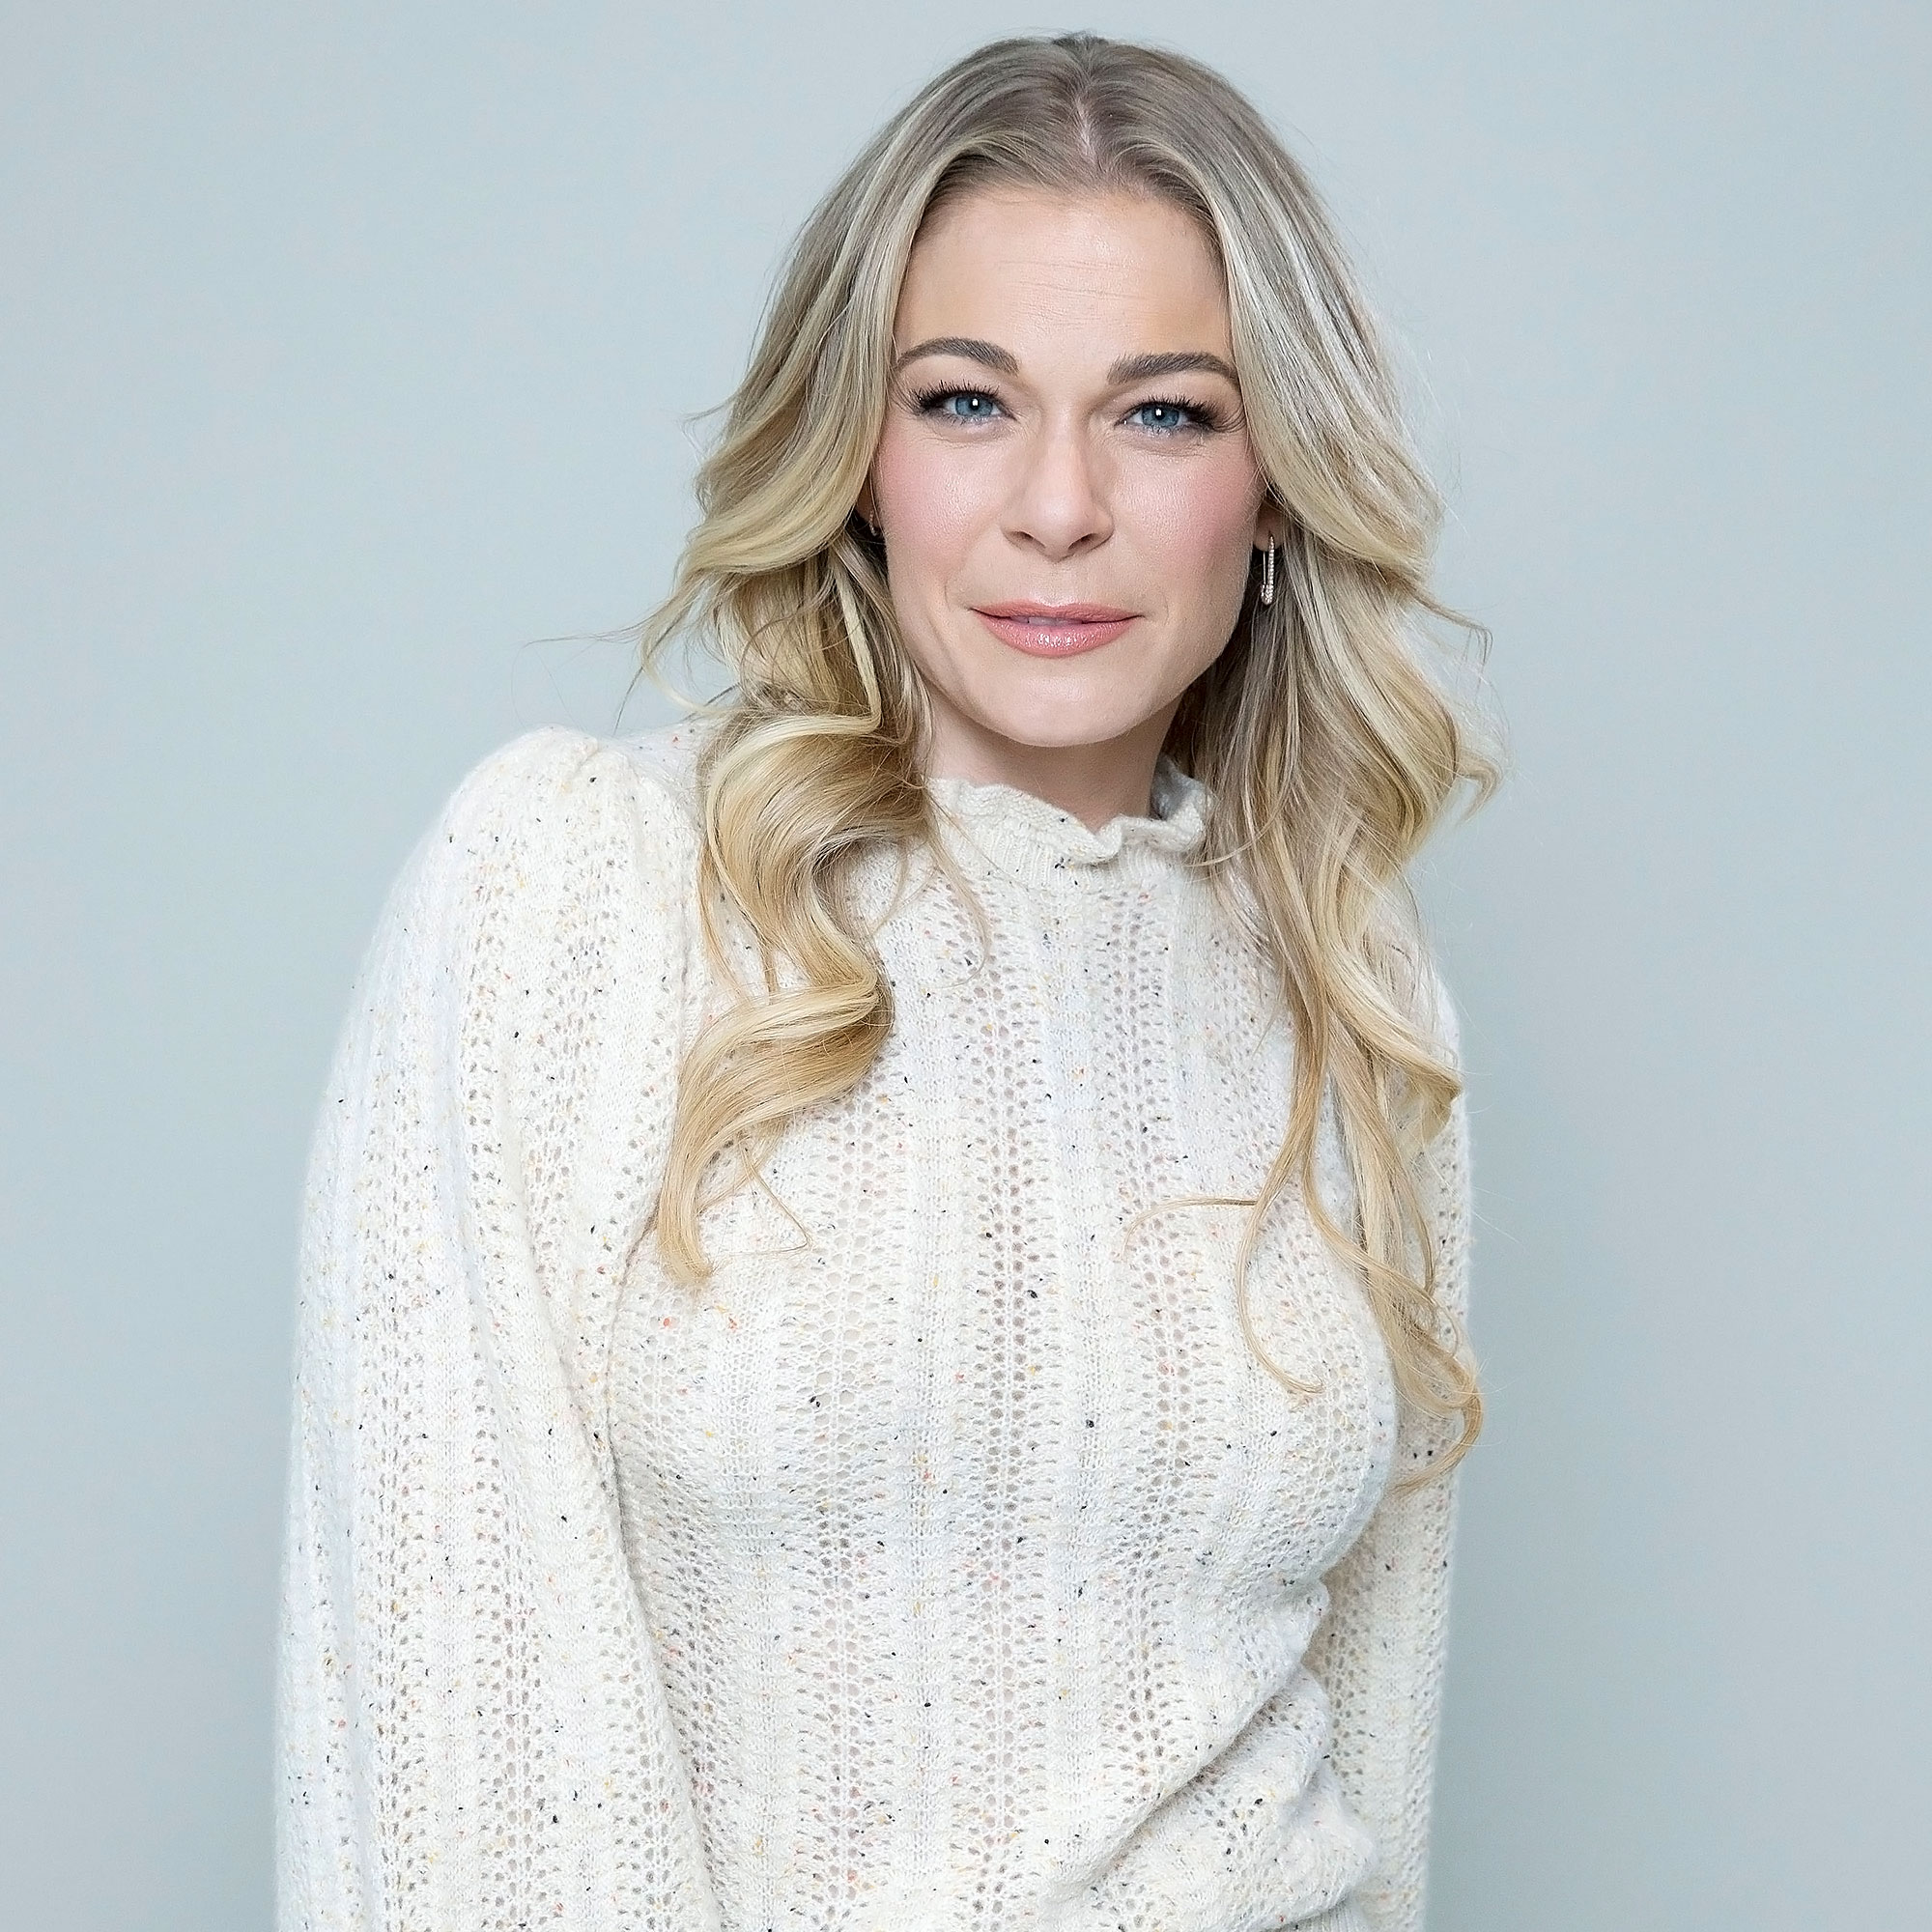 Nudist Magazine Pages - LeAnn Rimes Poses Nude After Psoriasis Returns Amid Pandemic